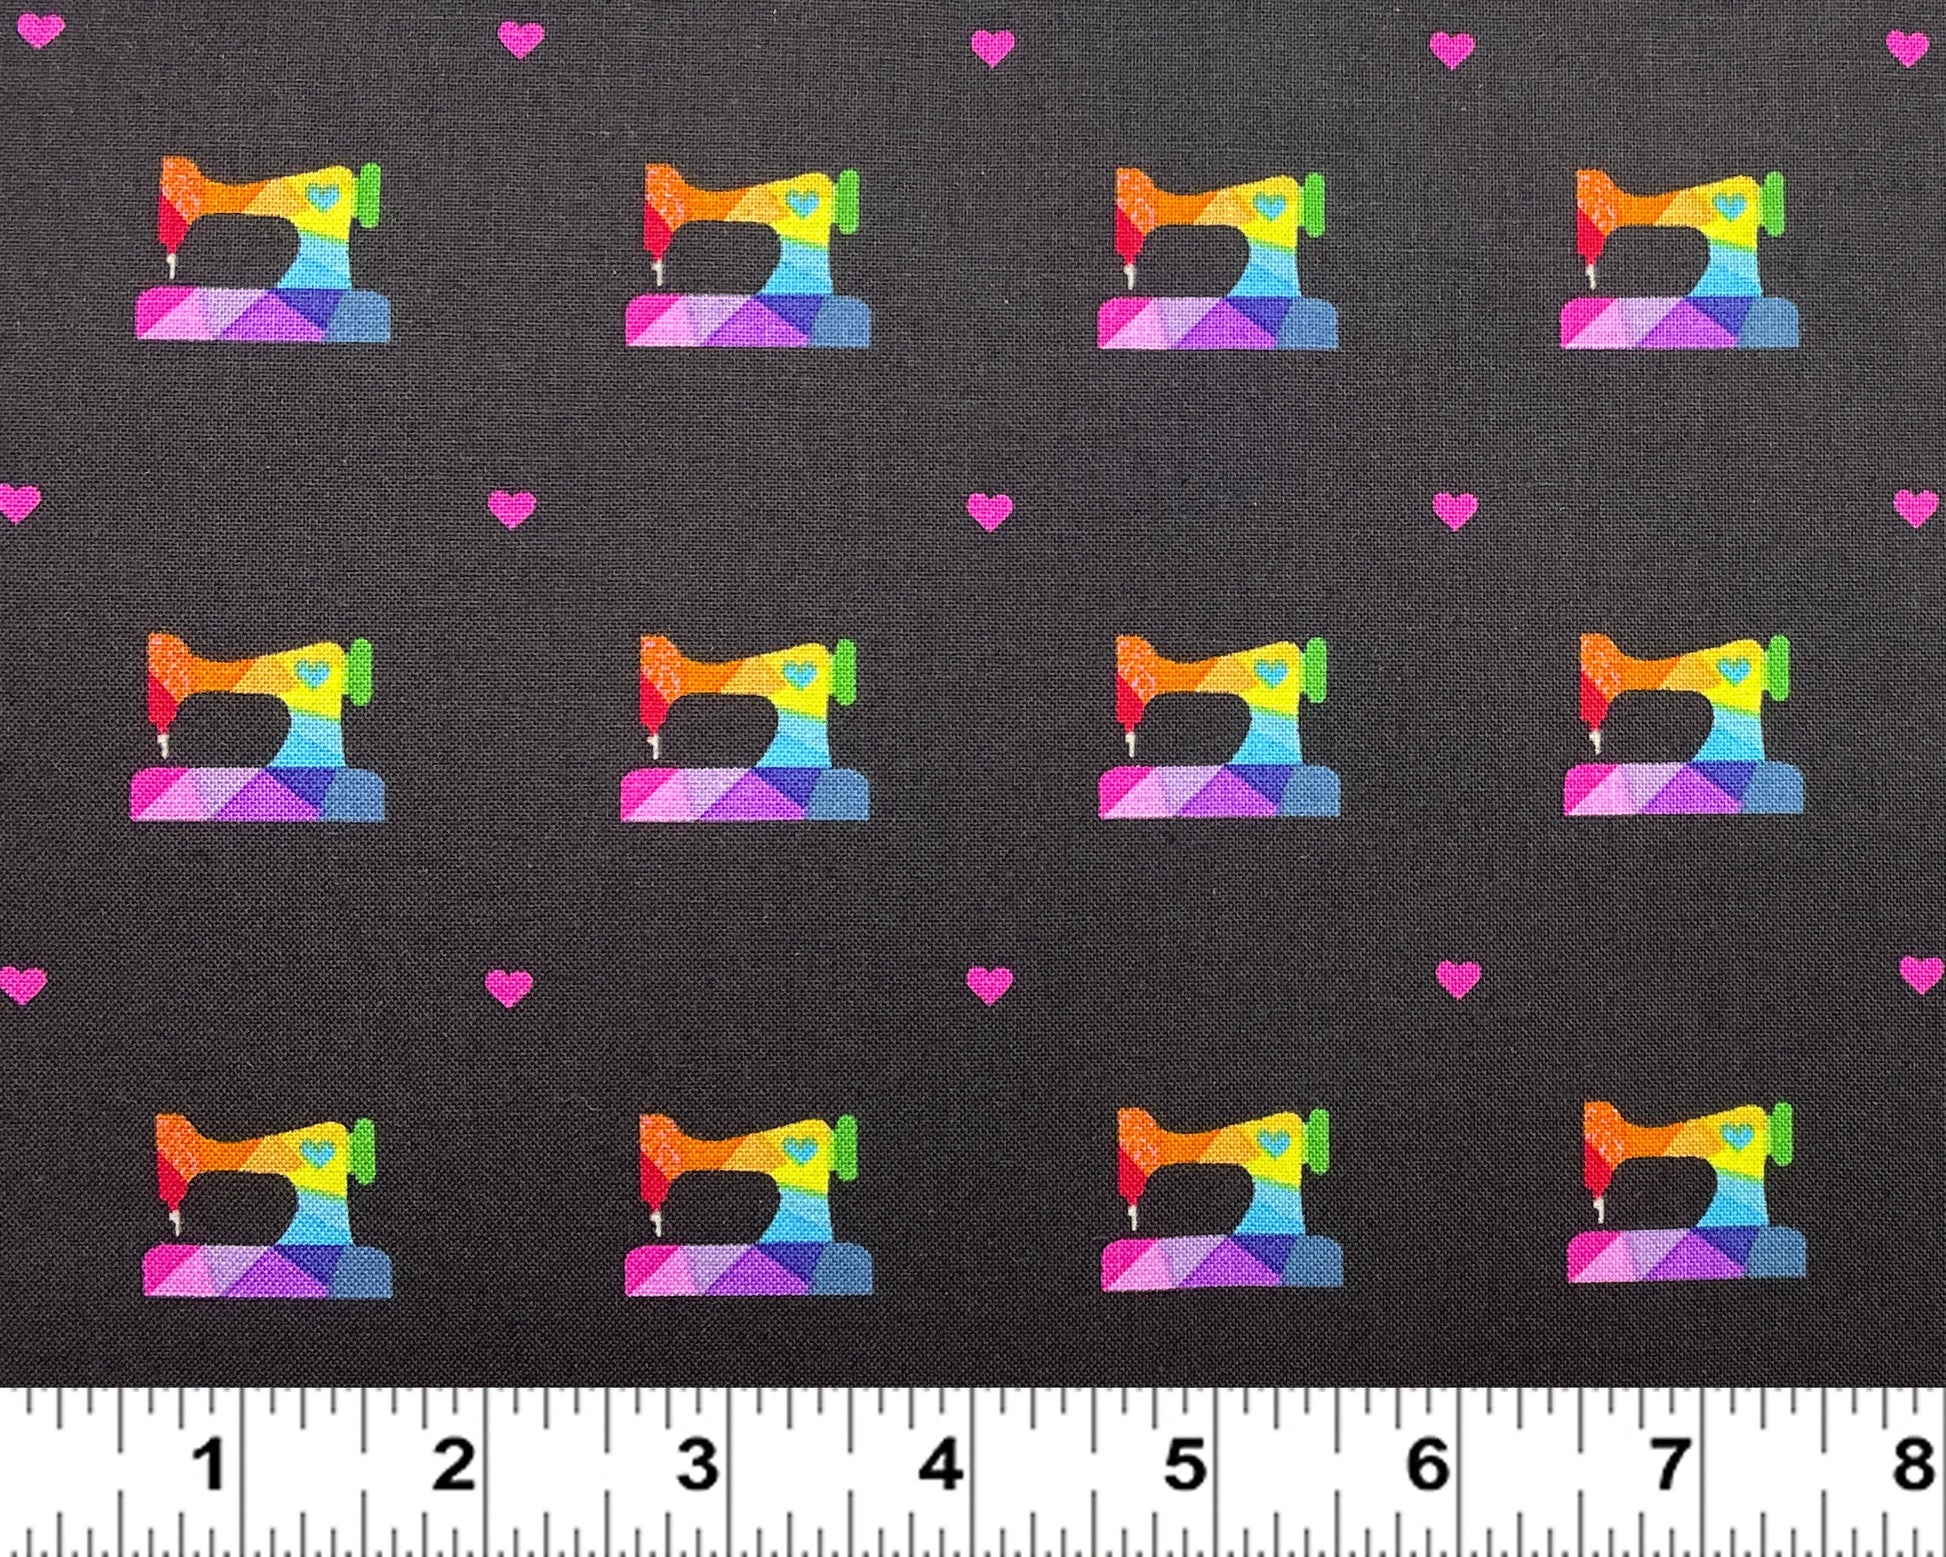 Sewing Machine Fabric - Make Geo Sewing Machine on Black - by Kristy Lea for Riley Blake - 100% Cotton - Sewing Theme Fabric -Ships NEXT DAY